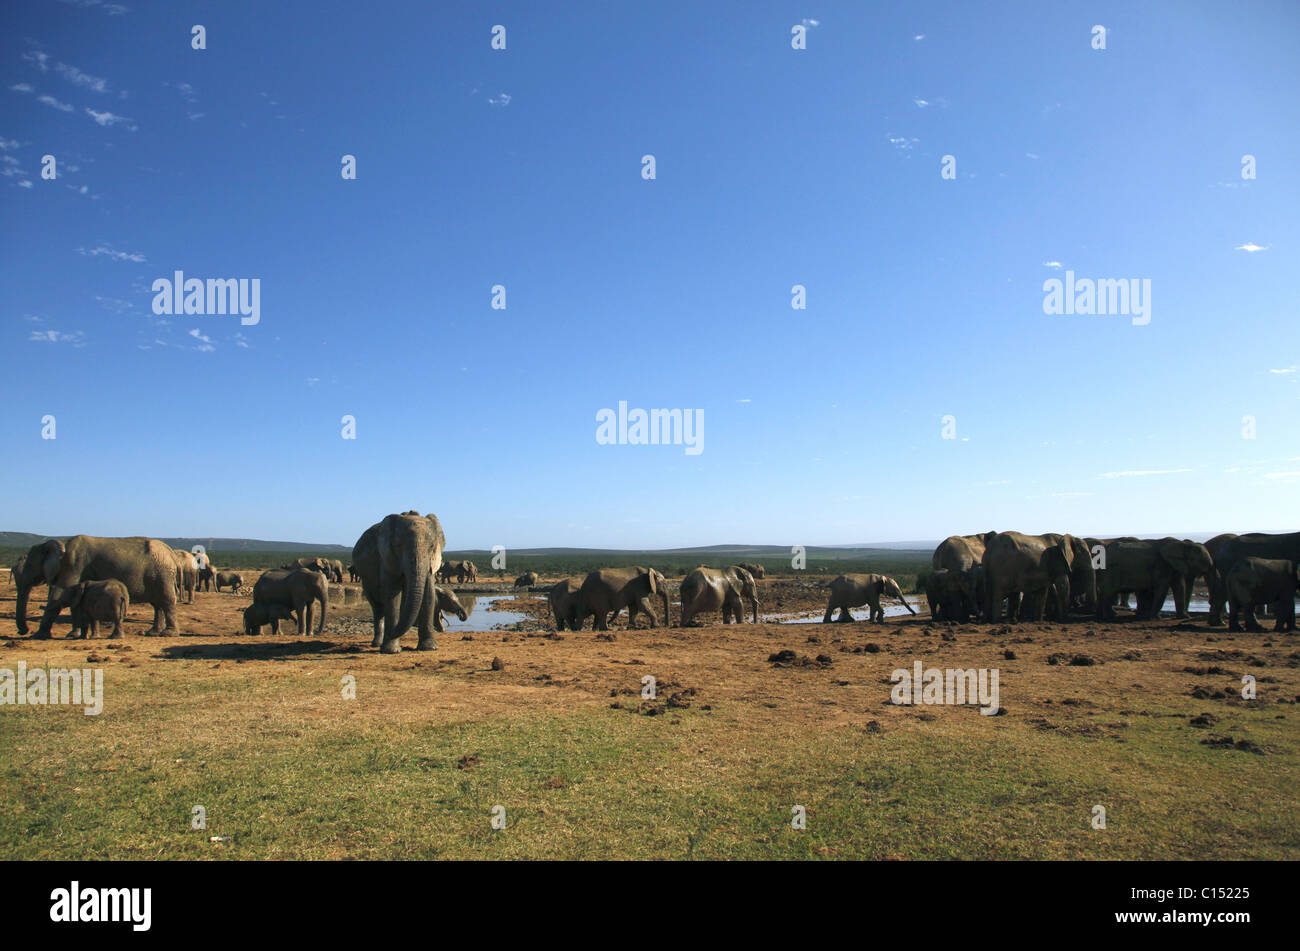 AFRICAN ELEPHANTS AT WATERHOLE ADDO SOUTH AFRICA ADDO NATIONAL PARK EASTERN CAPE SOUTH AFRICA ADDO ELEPHANT NATIONAL PARK 29 J Stock Photo